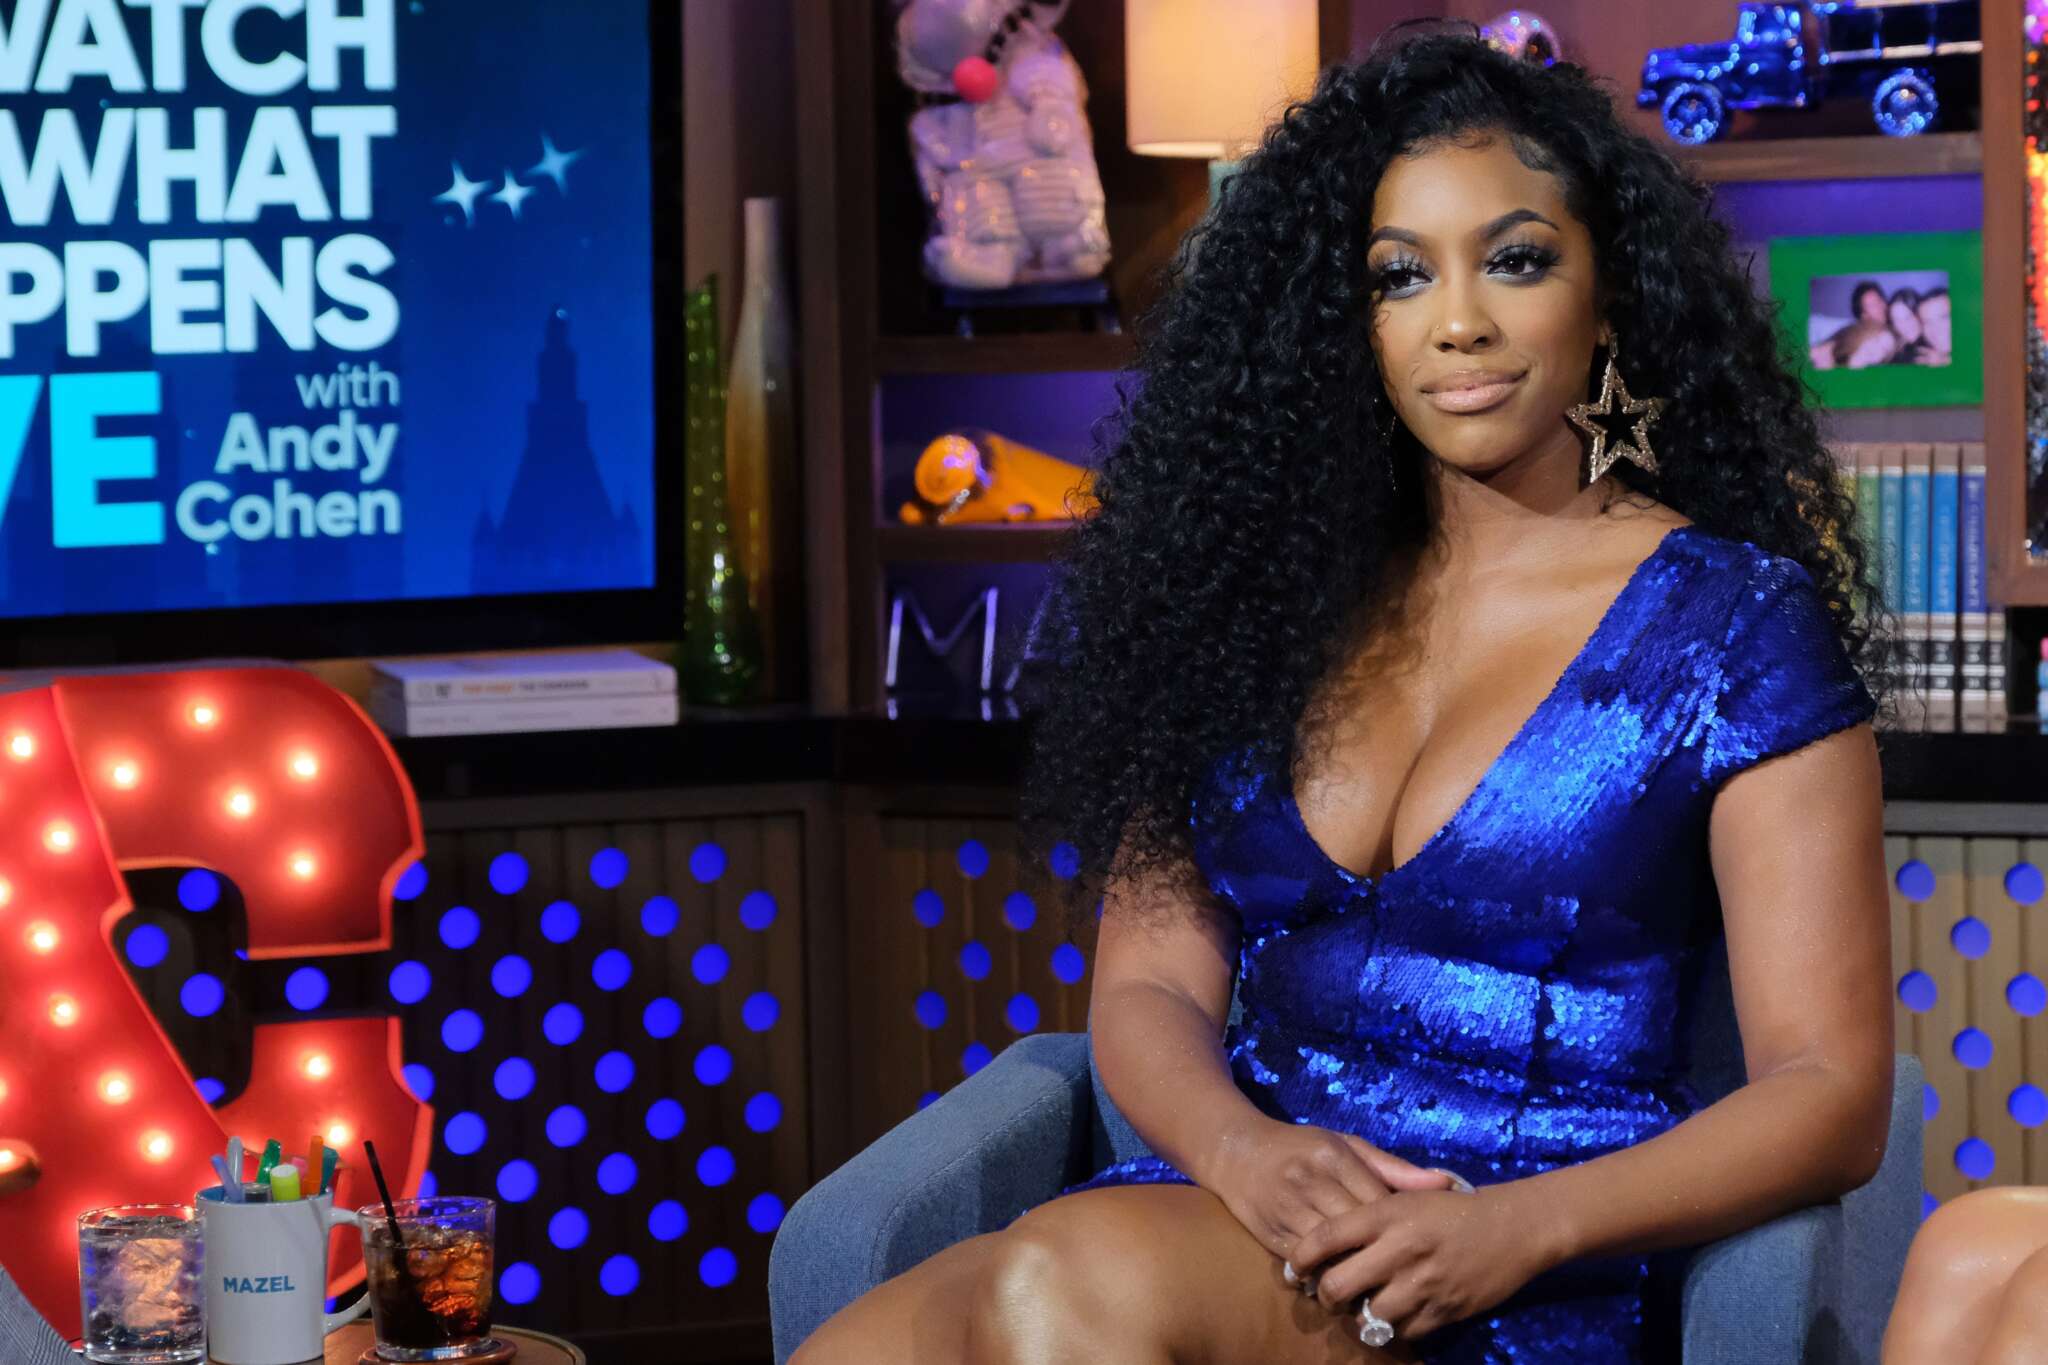 Porsha Williams' Fans Cannot Have Enough Of Her New Look - See Her Pics